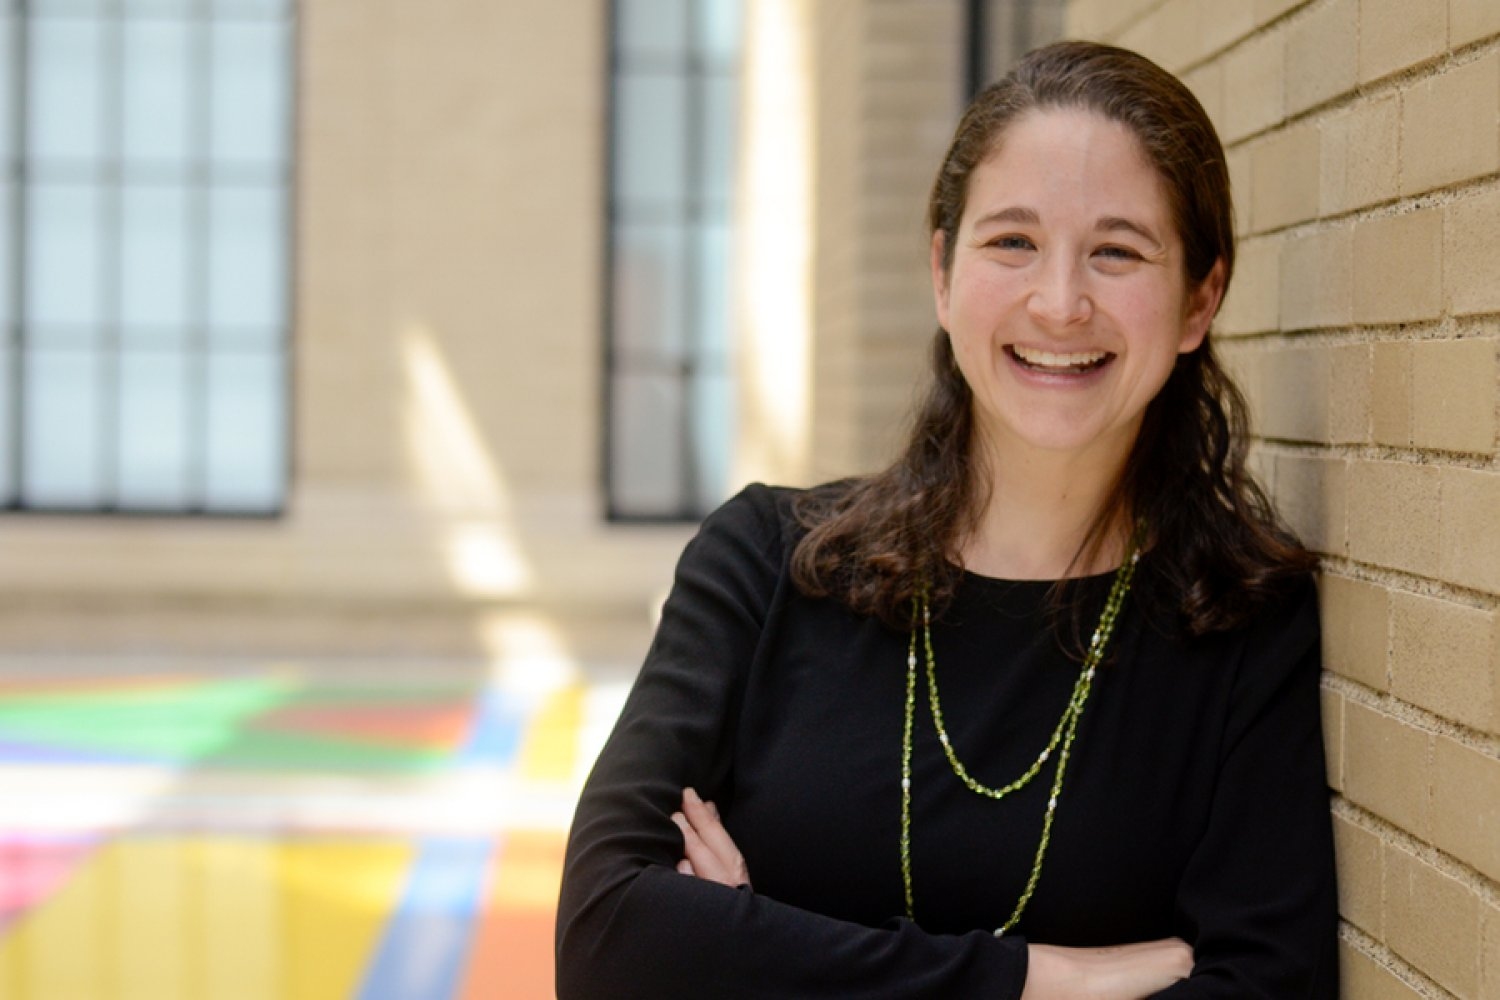 Professor Elsa Olivetti has been appointed associate dean of engineering. As associate dean, Olivetti will oversee a number of strategically important programs and initiatives across MIT’s School of Engineering.